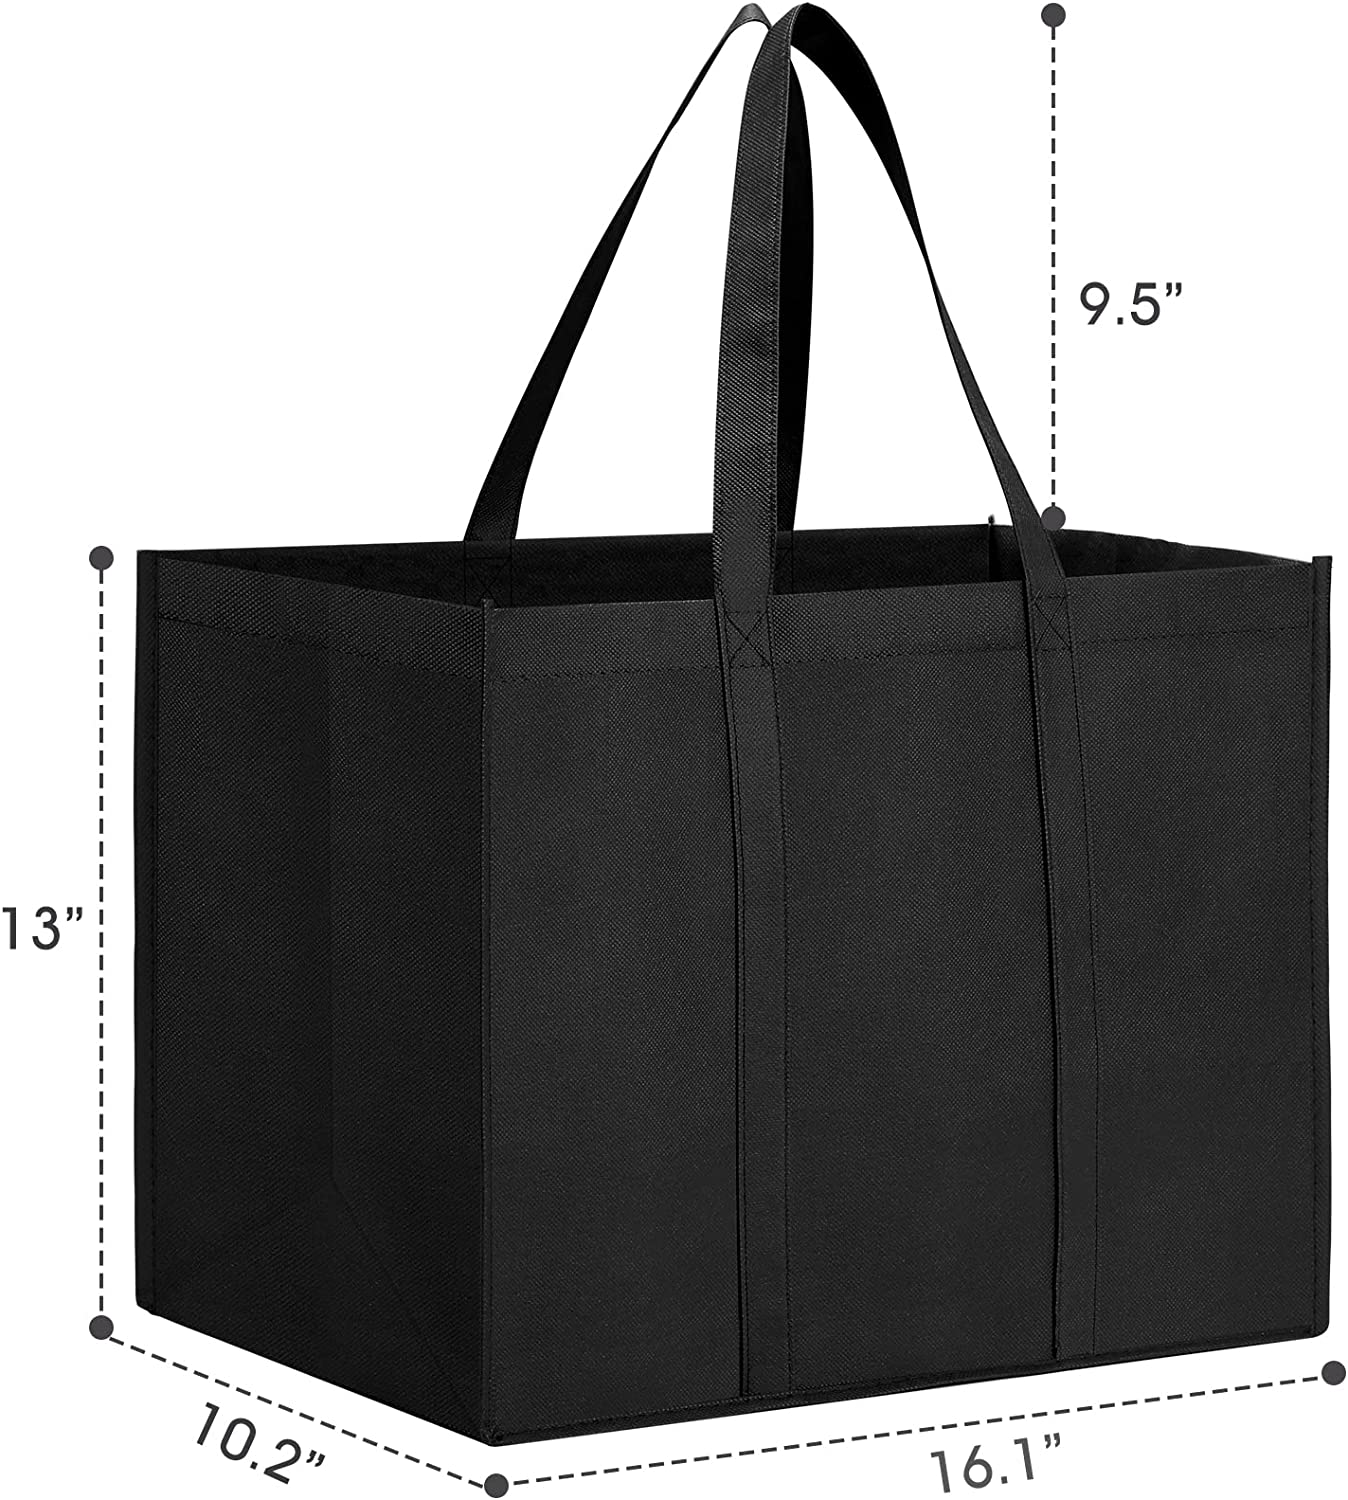 GOWINSEE 12 Pack Reusable Grocery Shopping Bags, Large Foldable Shopping Bags Tote Bags, Produce Bag with Reinforced Han - image 3 of 6